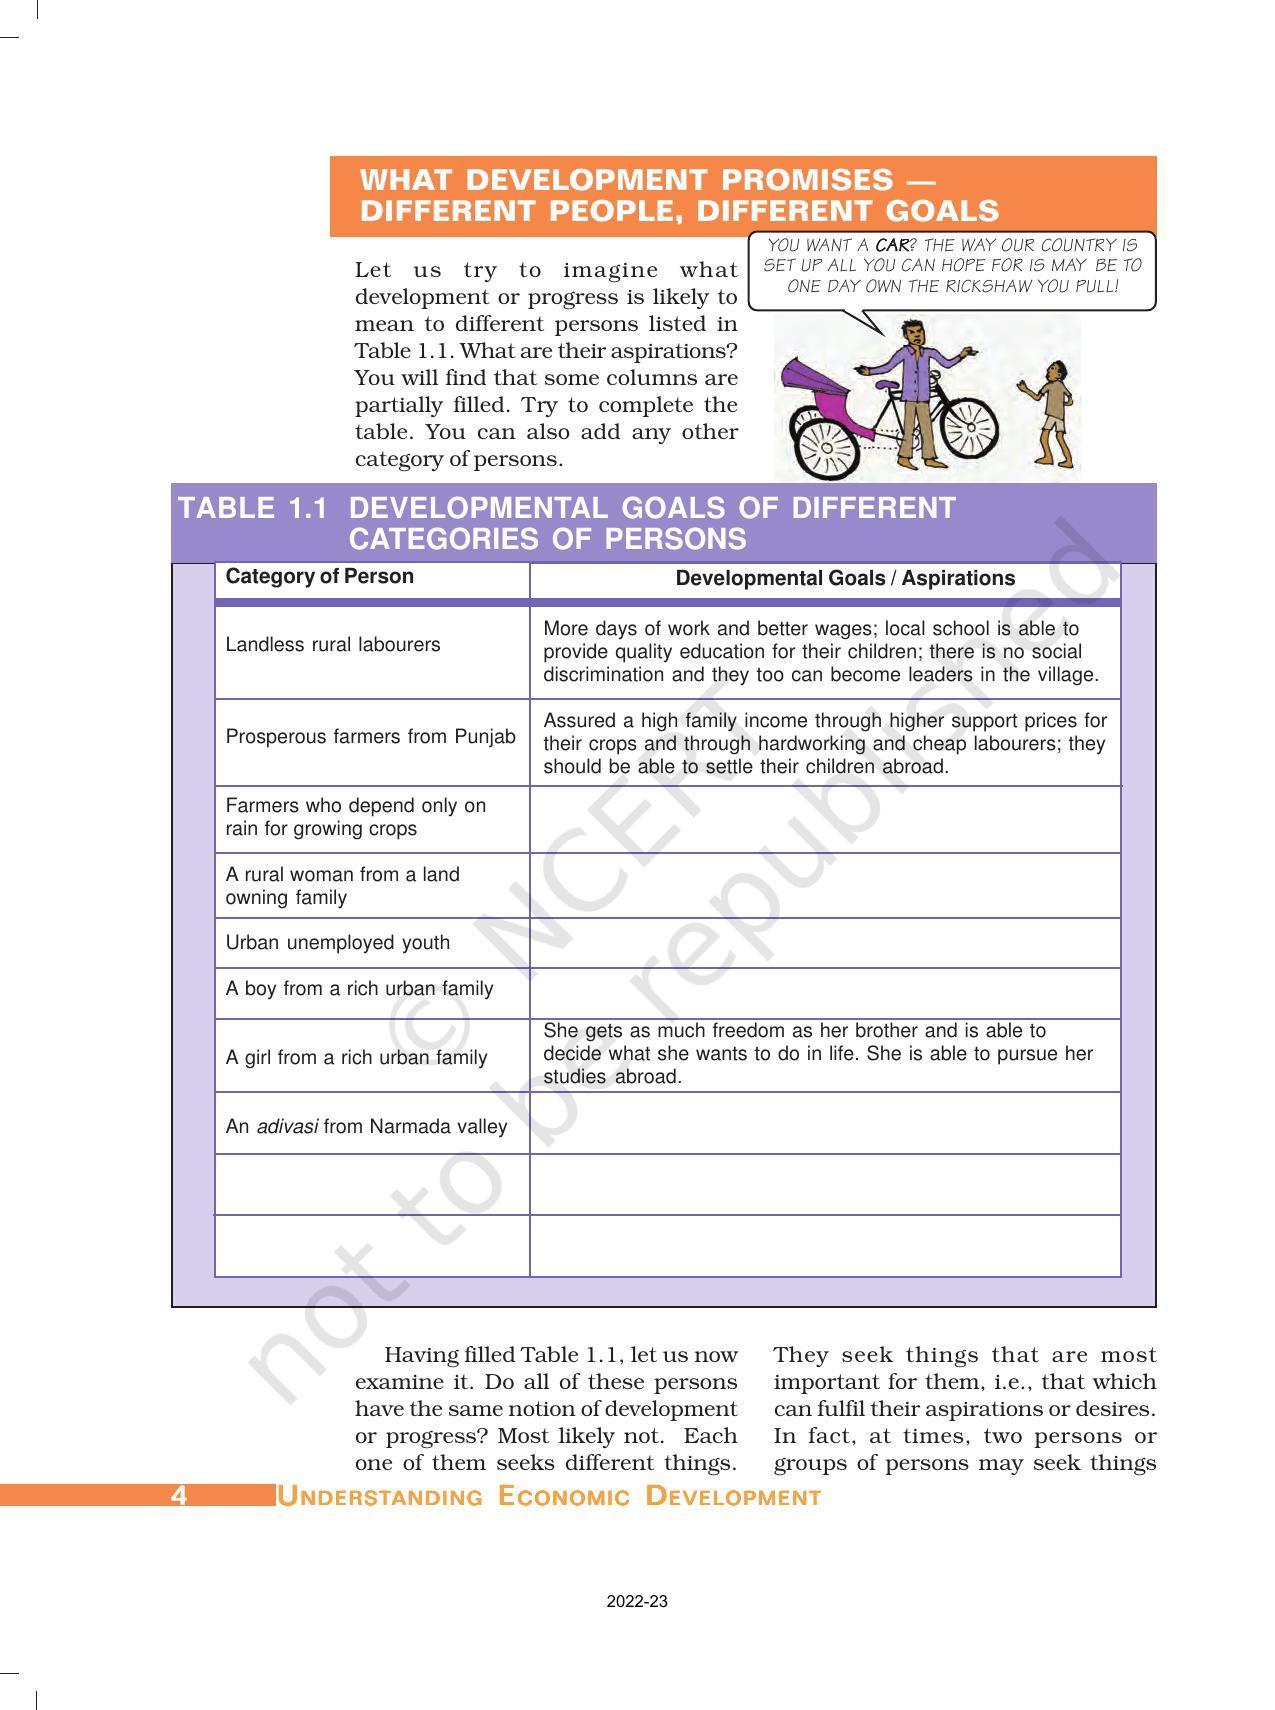 NCERT Book for Class 10 Economics Chapter 1 Development - Page 3